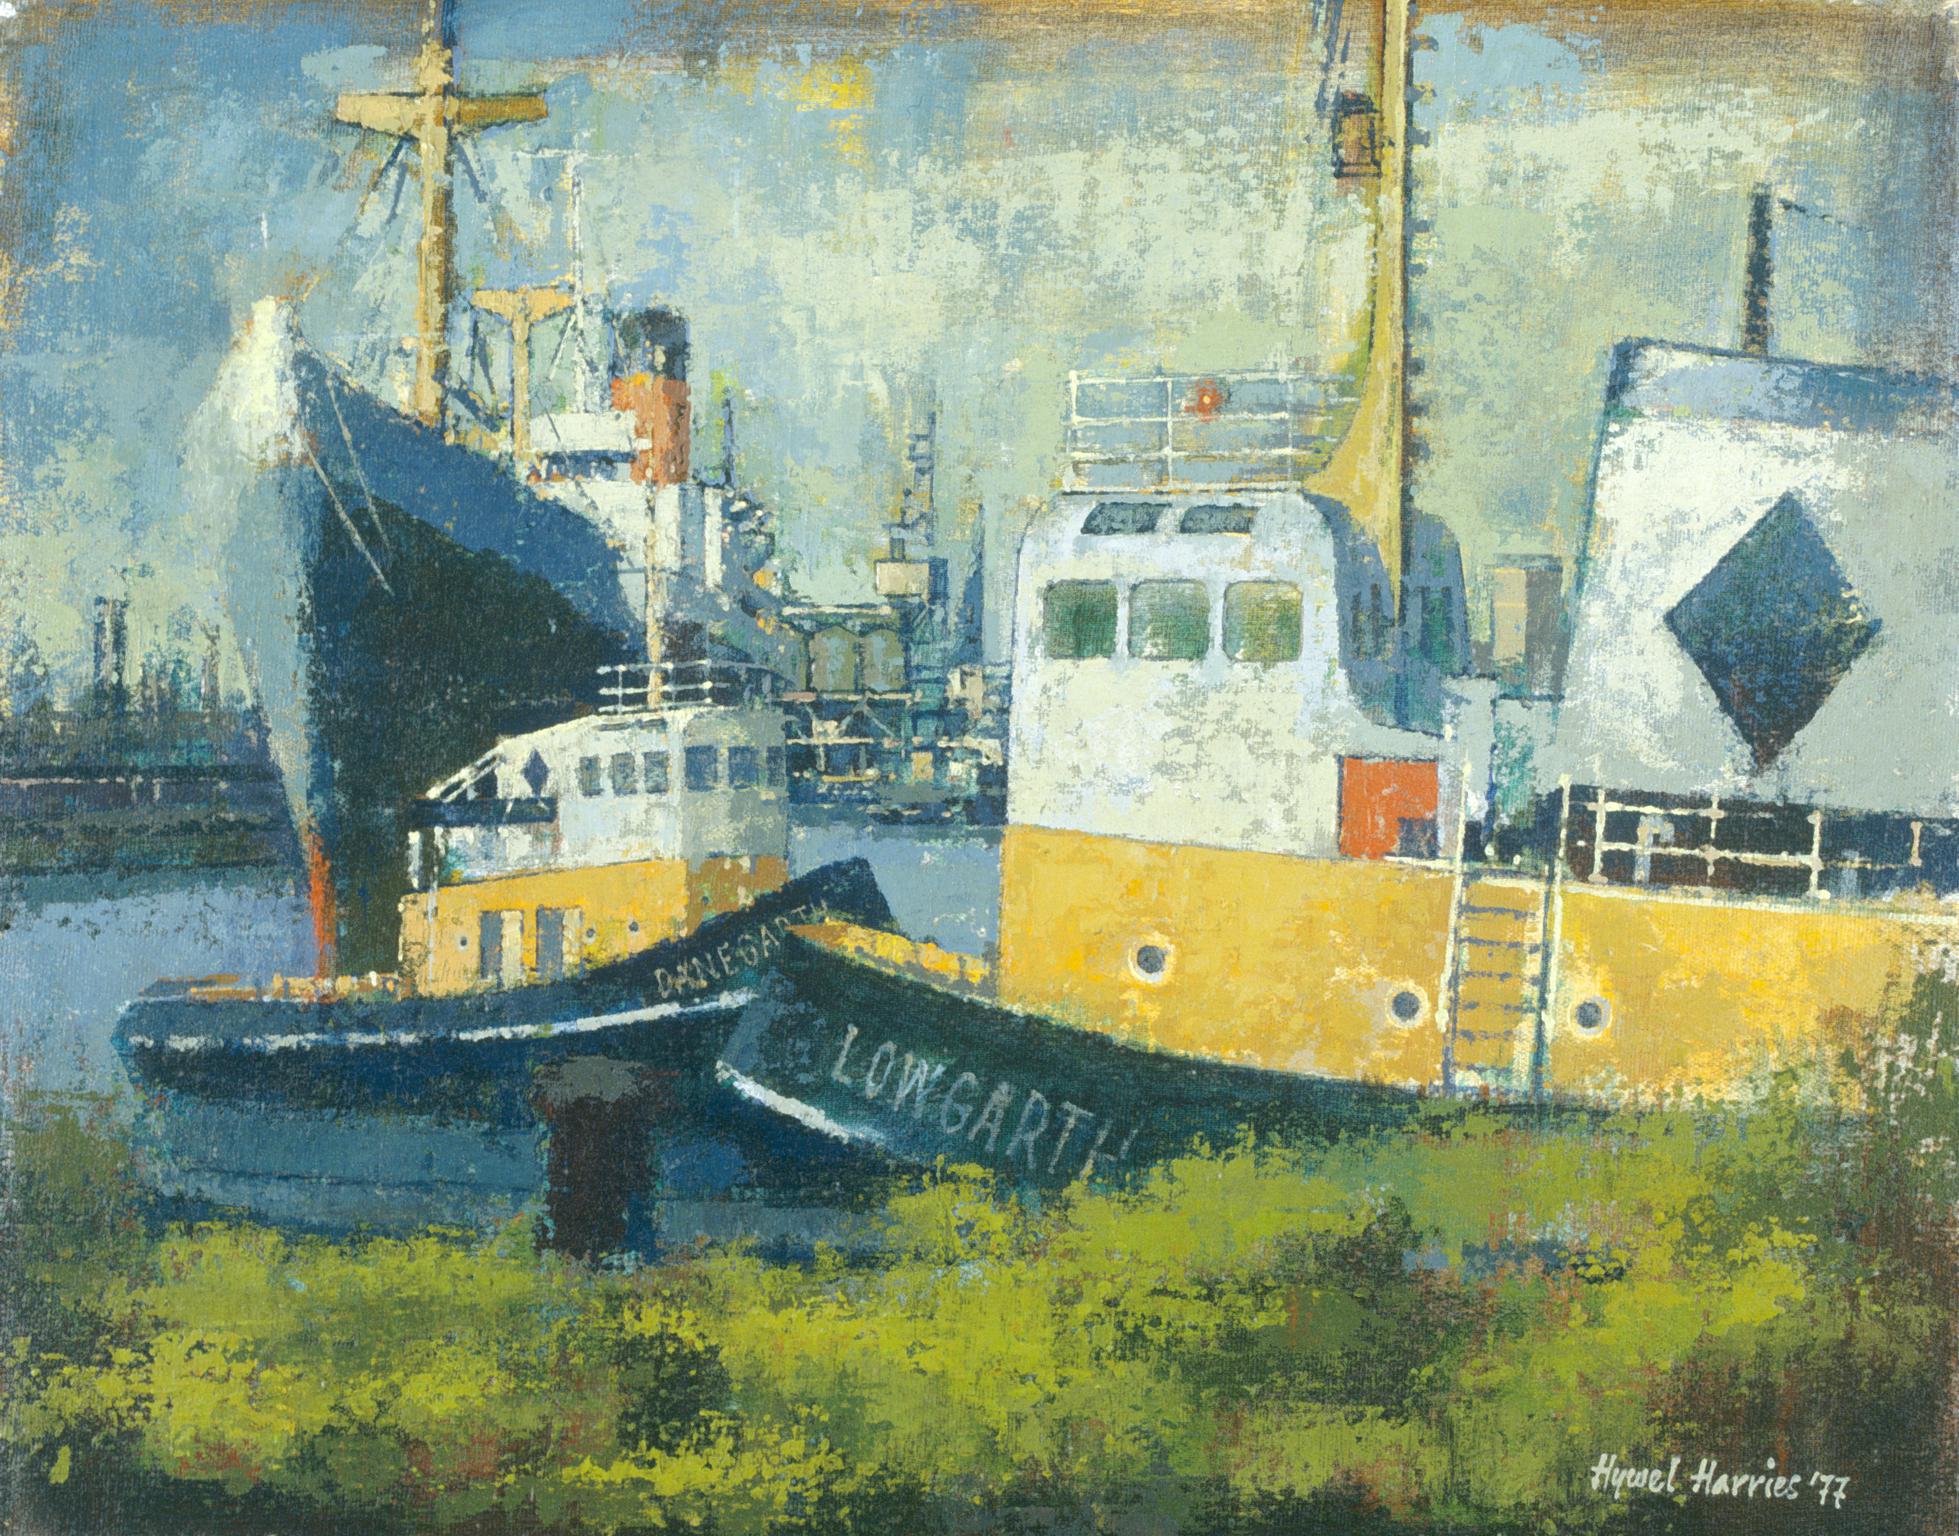 The Tugboats LOWGARTH and DANEGARTH at Cardiff (painting)